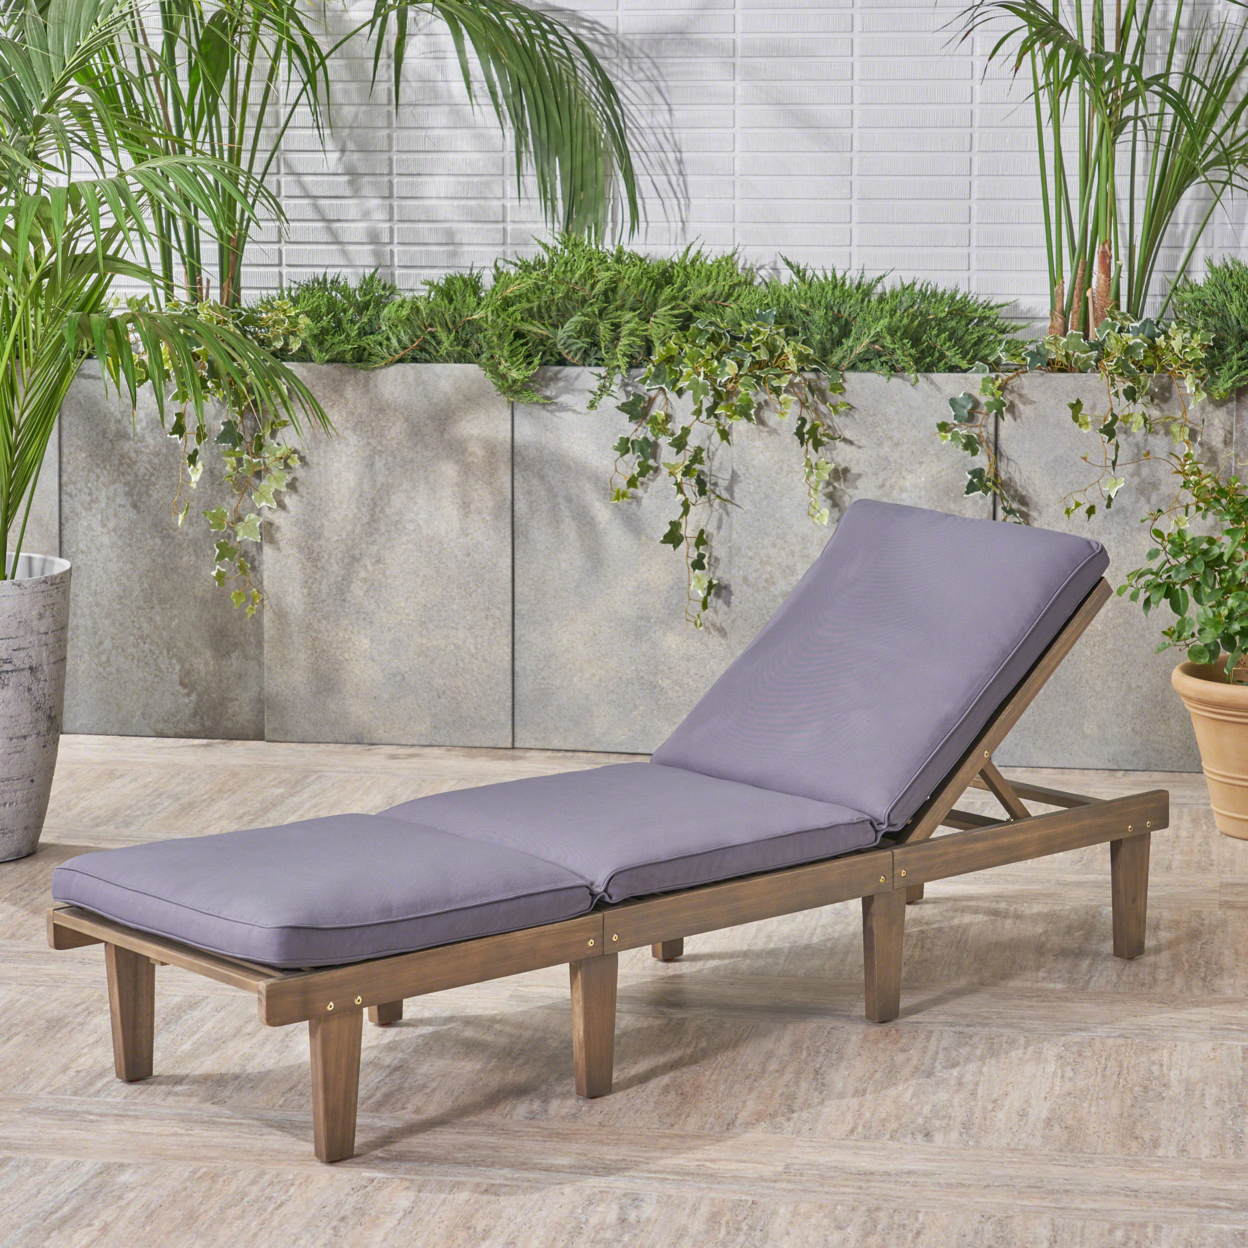 Alisa Outdoor Acacia Wood Chaise Lounge With Cushion, Gray And Dark Gray - Single